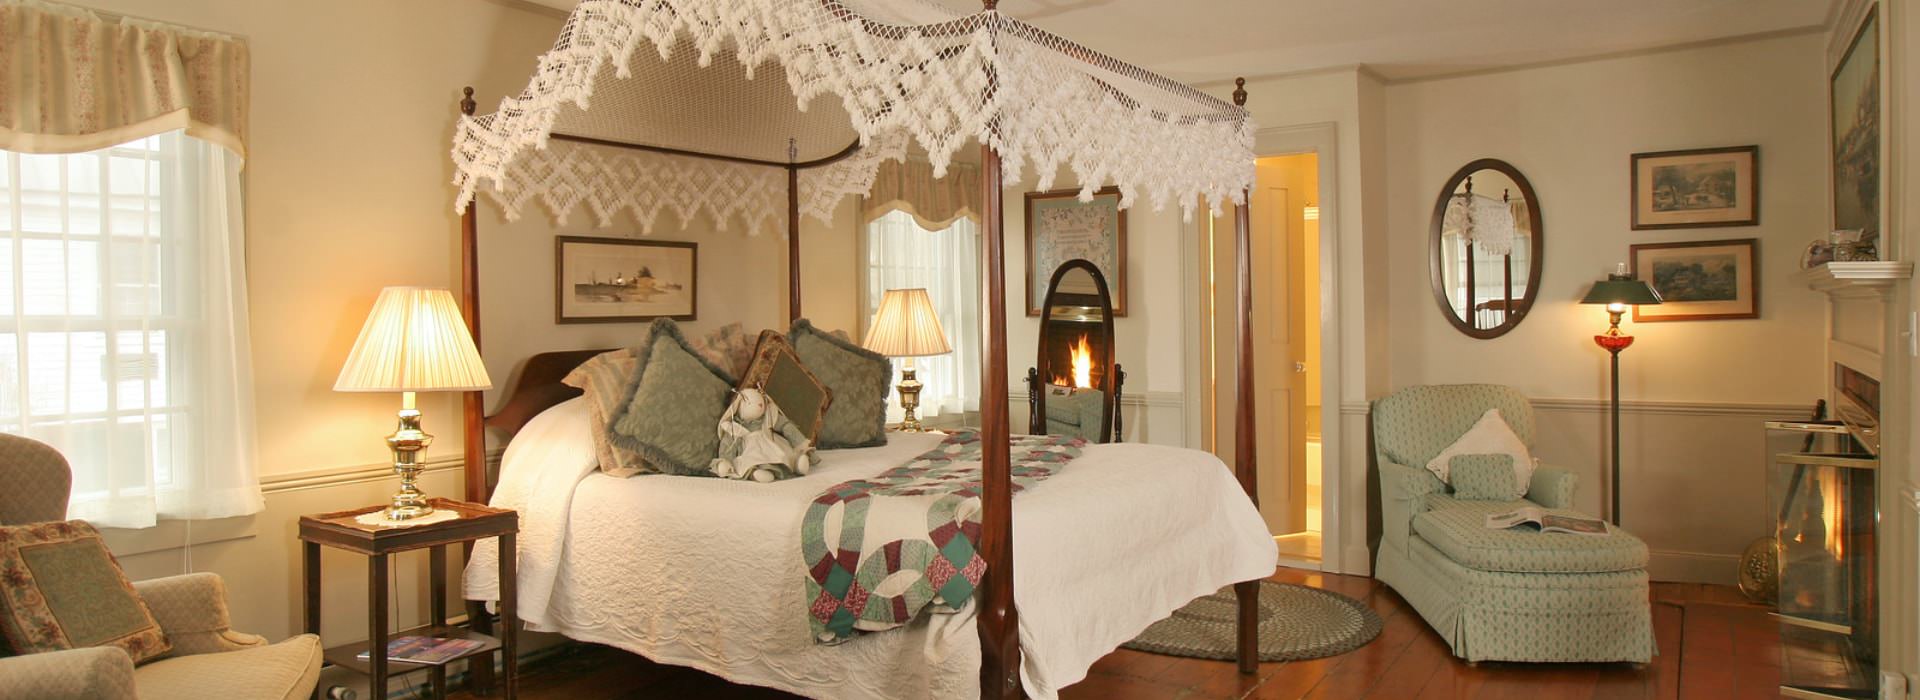 Large bedroom suite with hardwood floors, light-colored walls, dark wooden four-poster canopy bed with white bedding, sitting area, and fireplace